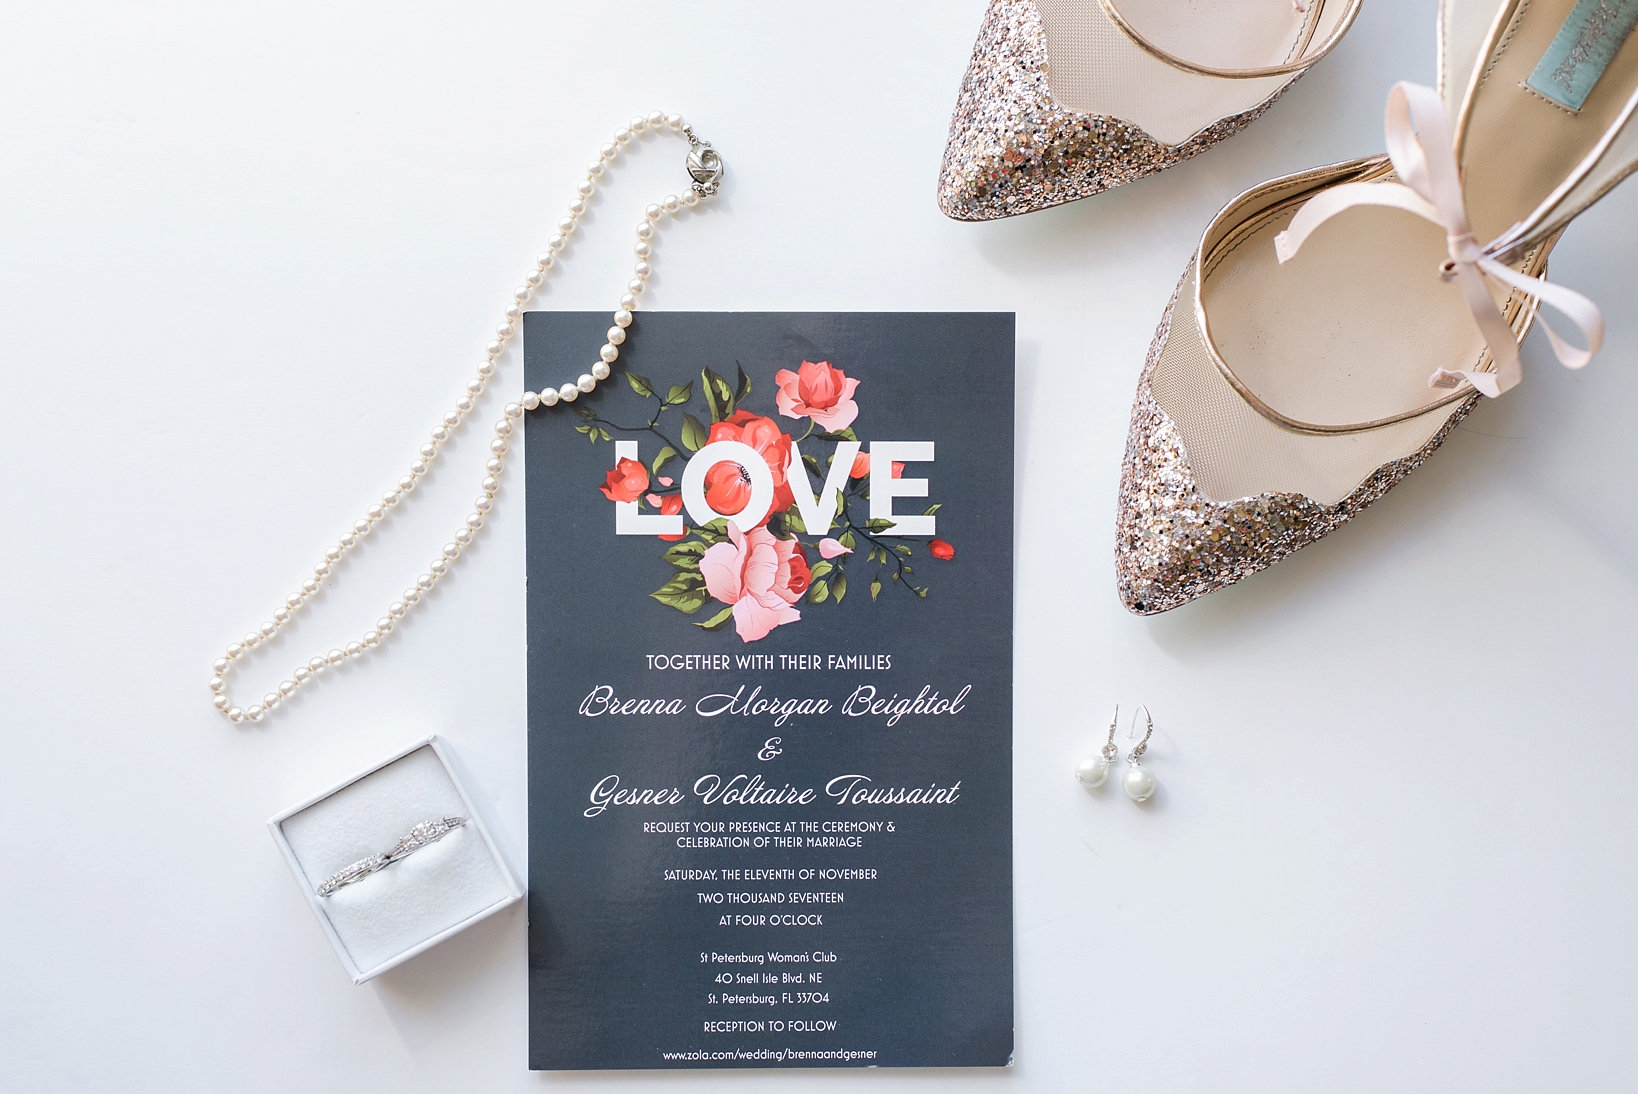 Wedding invitation with bridal details such as pearl necklace, earrings, rings and Betsy Johnson Shoes